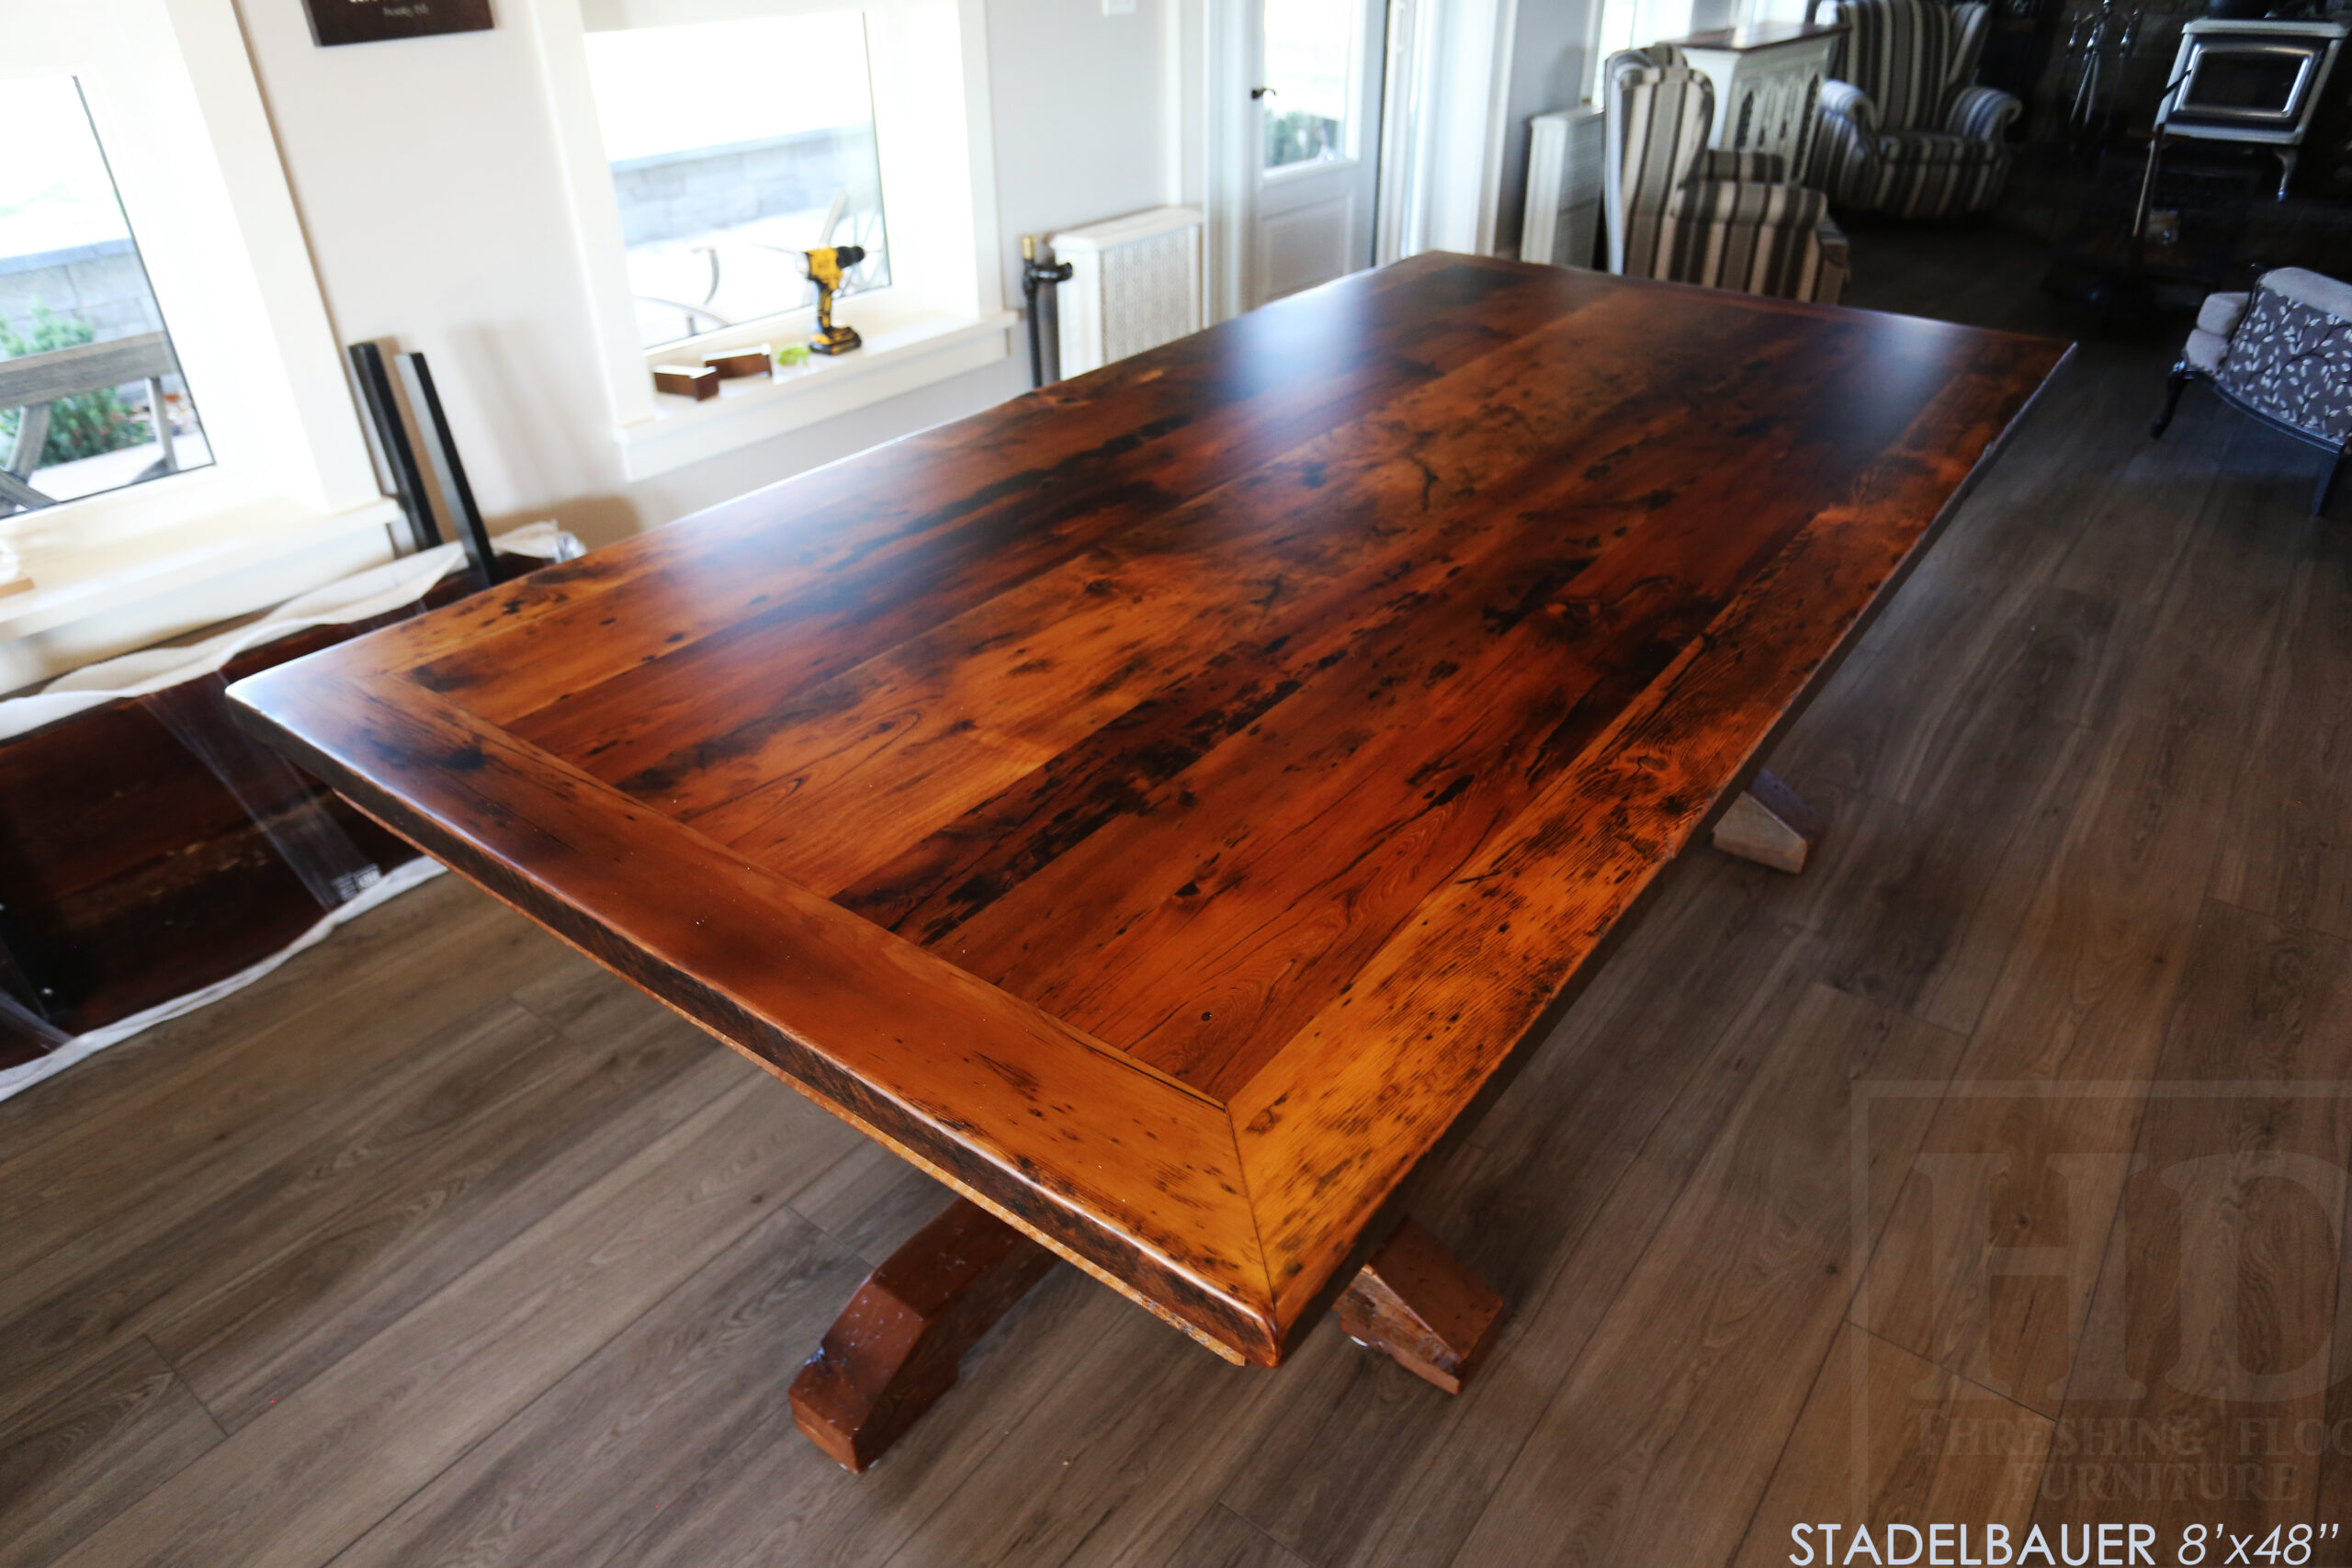 8â€™ Reclaimed Ontario Barnwood Table we made for a Beamsville, Ontario home â€“ 48â€ wide â€“  Hand Hewn Pedestals Base - Old Growth Hemlock Threshing Floor Construction - Original edges & distressing maintained â€“ Bread Edge Ends â€“ Premium epoxy + matte polyurethane finish â€“ [2] 18â€ leaf extensions â€“ [2] Drawers â€“ Lee Valley Hardware Cast Brass Handle - www.table.ca